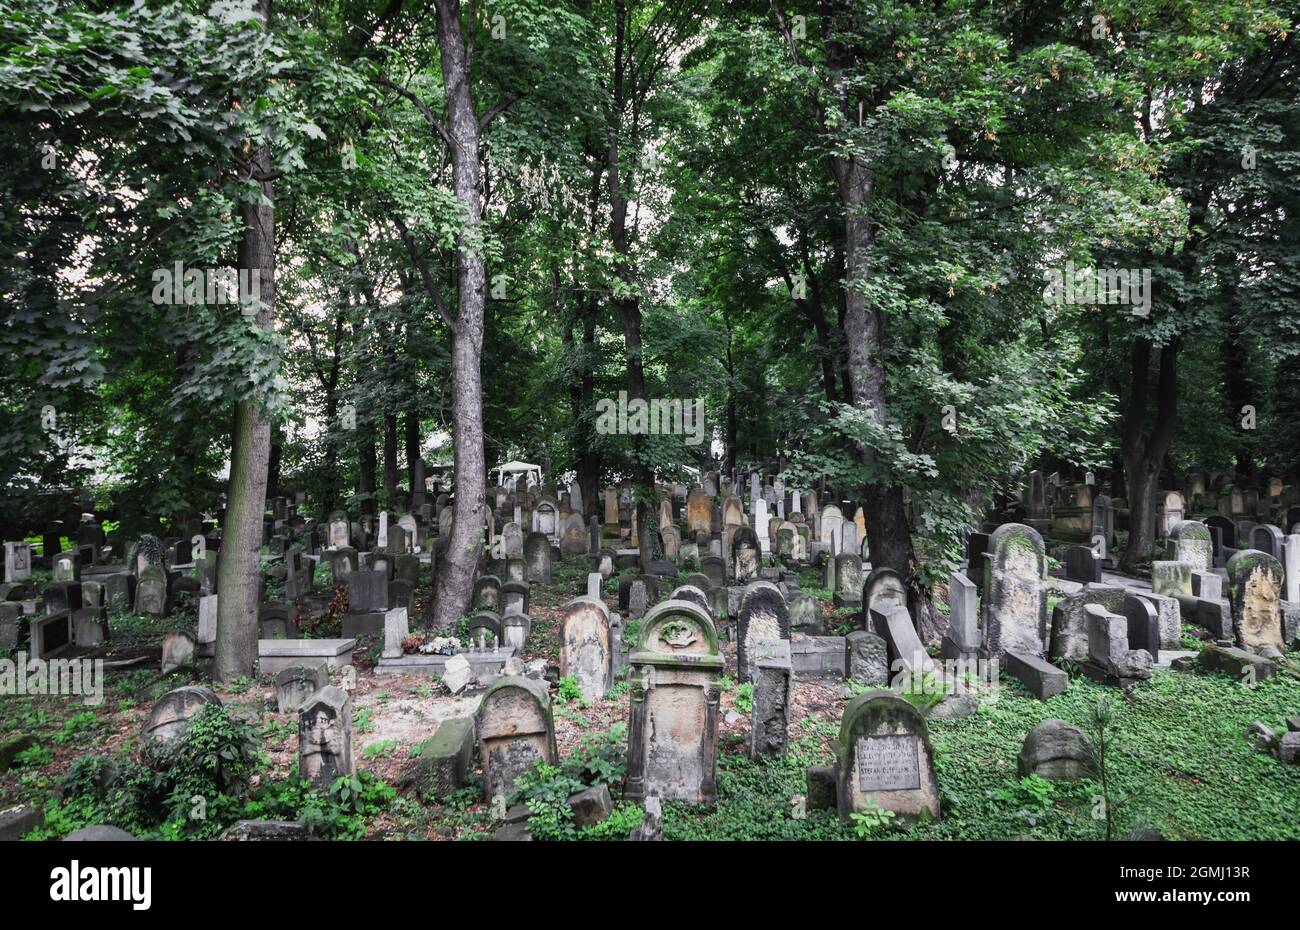 A view from above of the gravestones in the new Jewish cemetery in Krakow, Poland Stock Photo